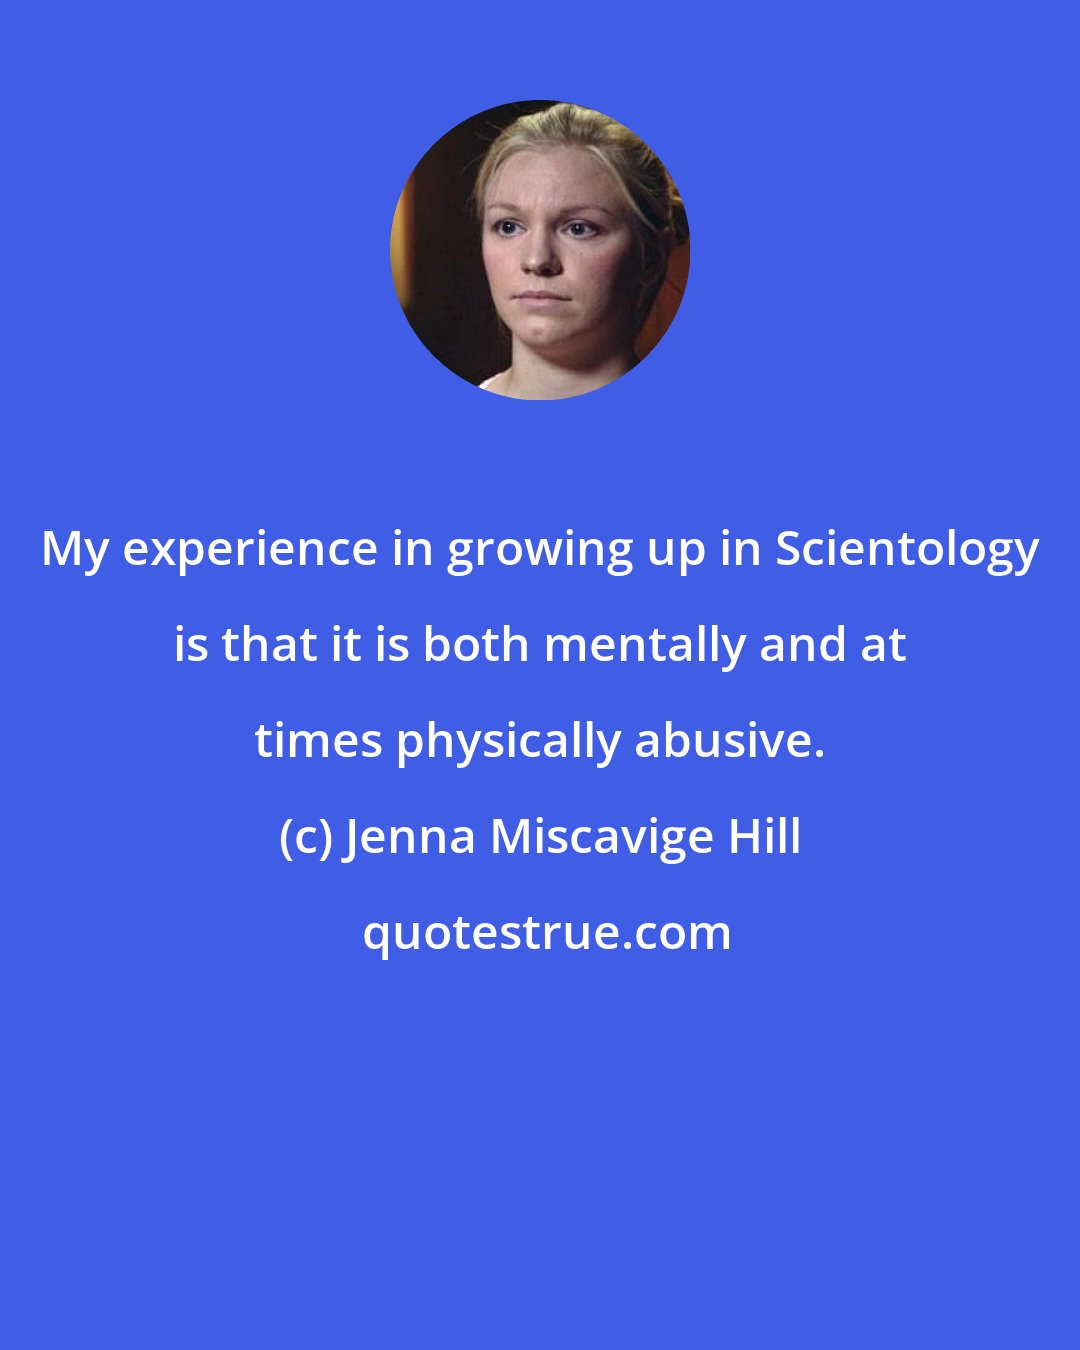 Jenna Miscavige Hill: My experience in growing up in Scientology is that it is both mentally and at times physically abusive.